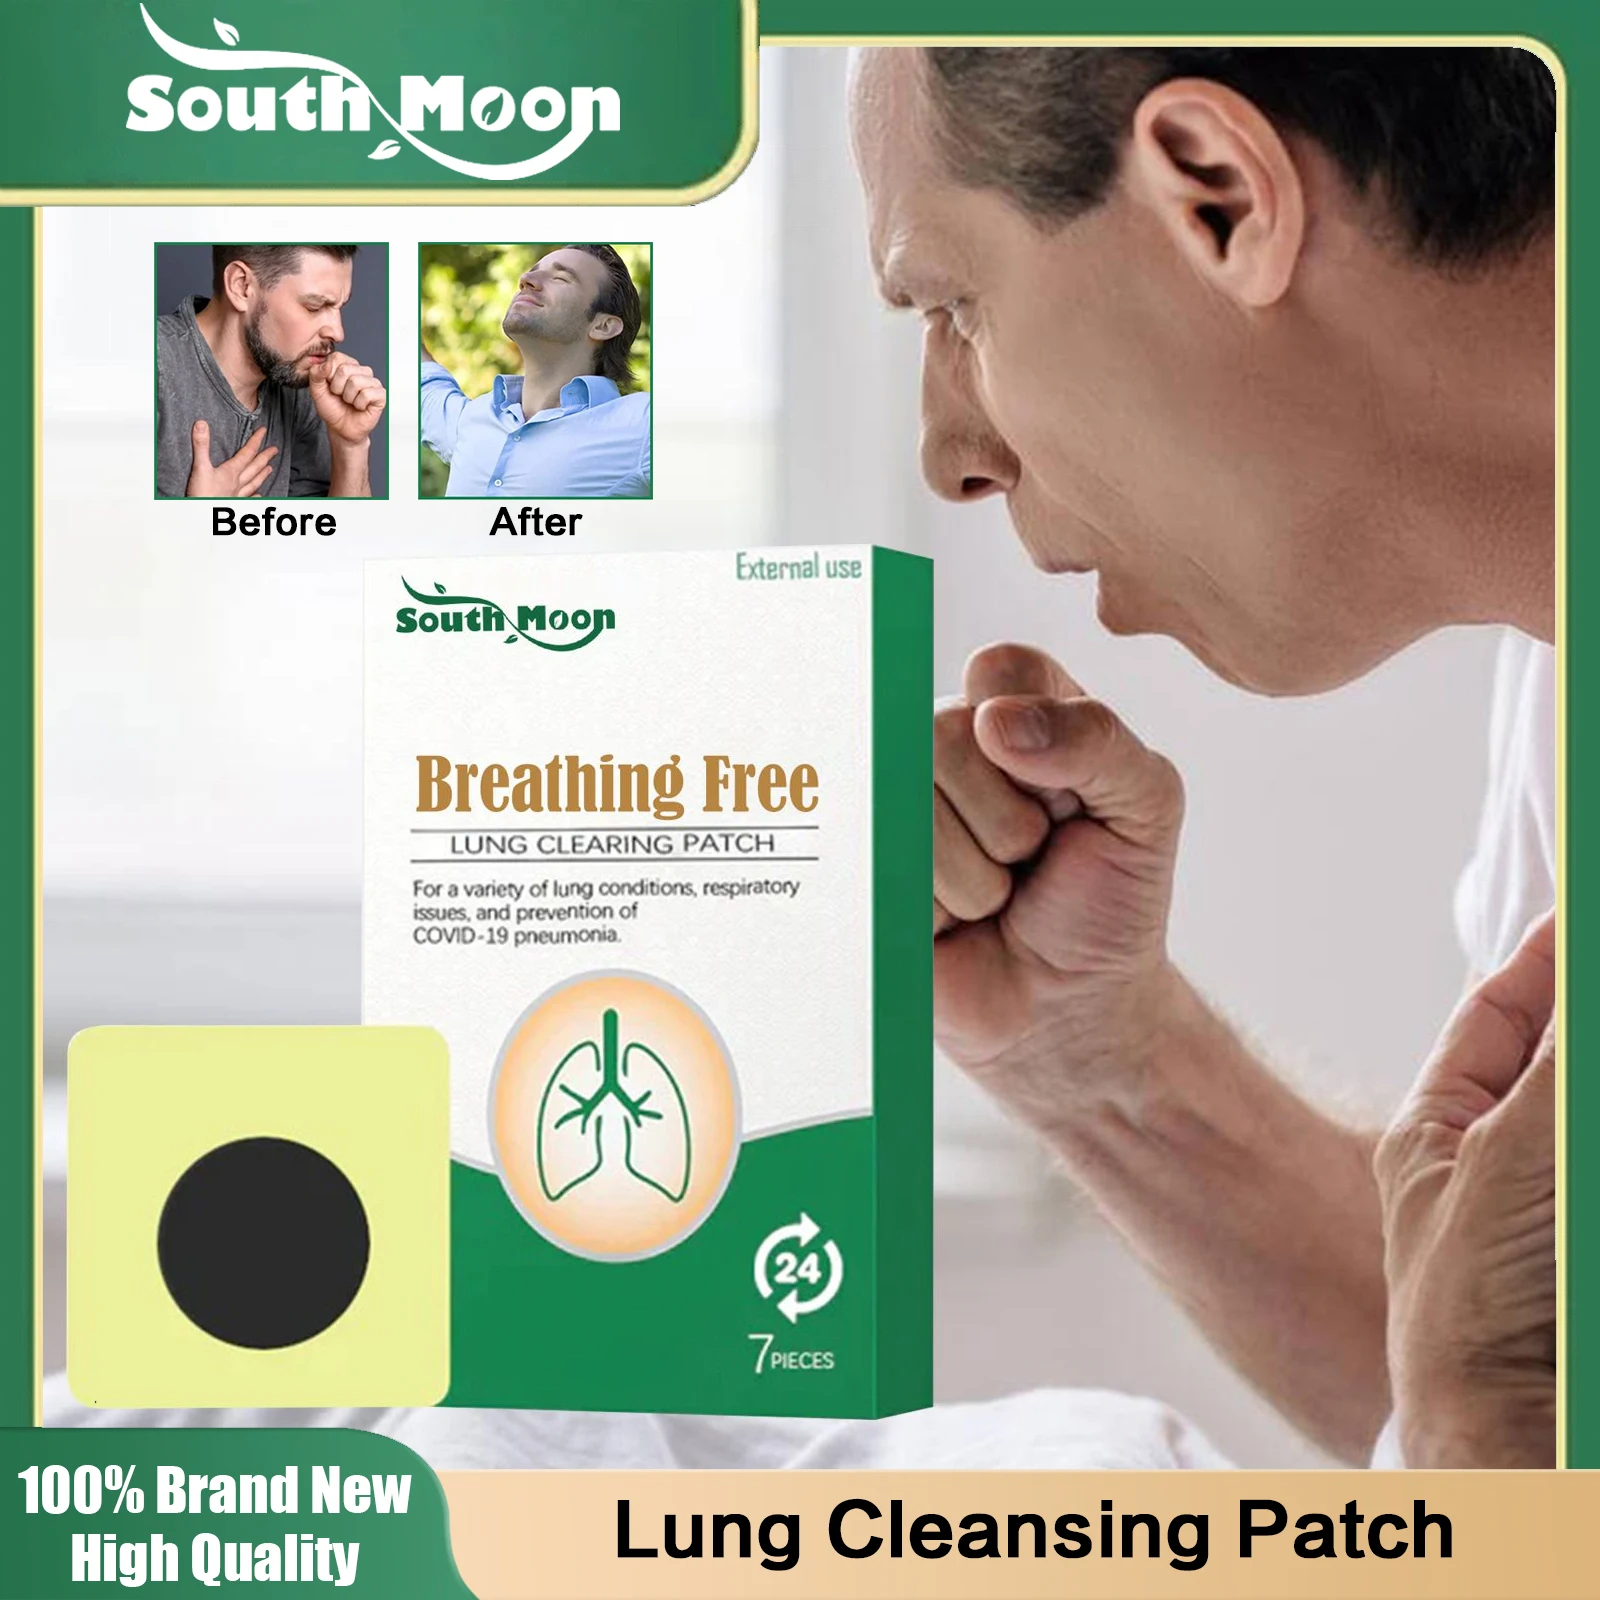 

Lung Cleansing Patch Clear Nasal Congestion Relieve Coughing Sore Throat Remove Nasal Mucus Natural Herbal Lung Detox Sticker